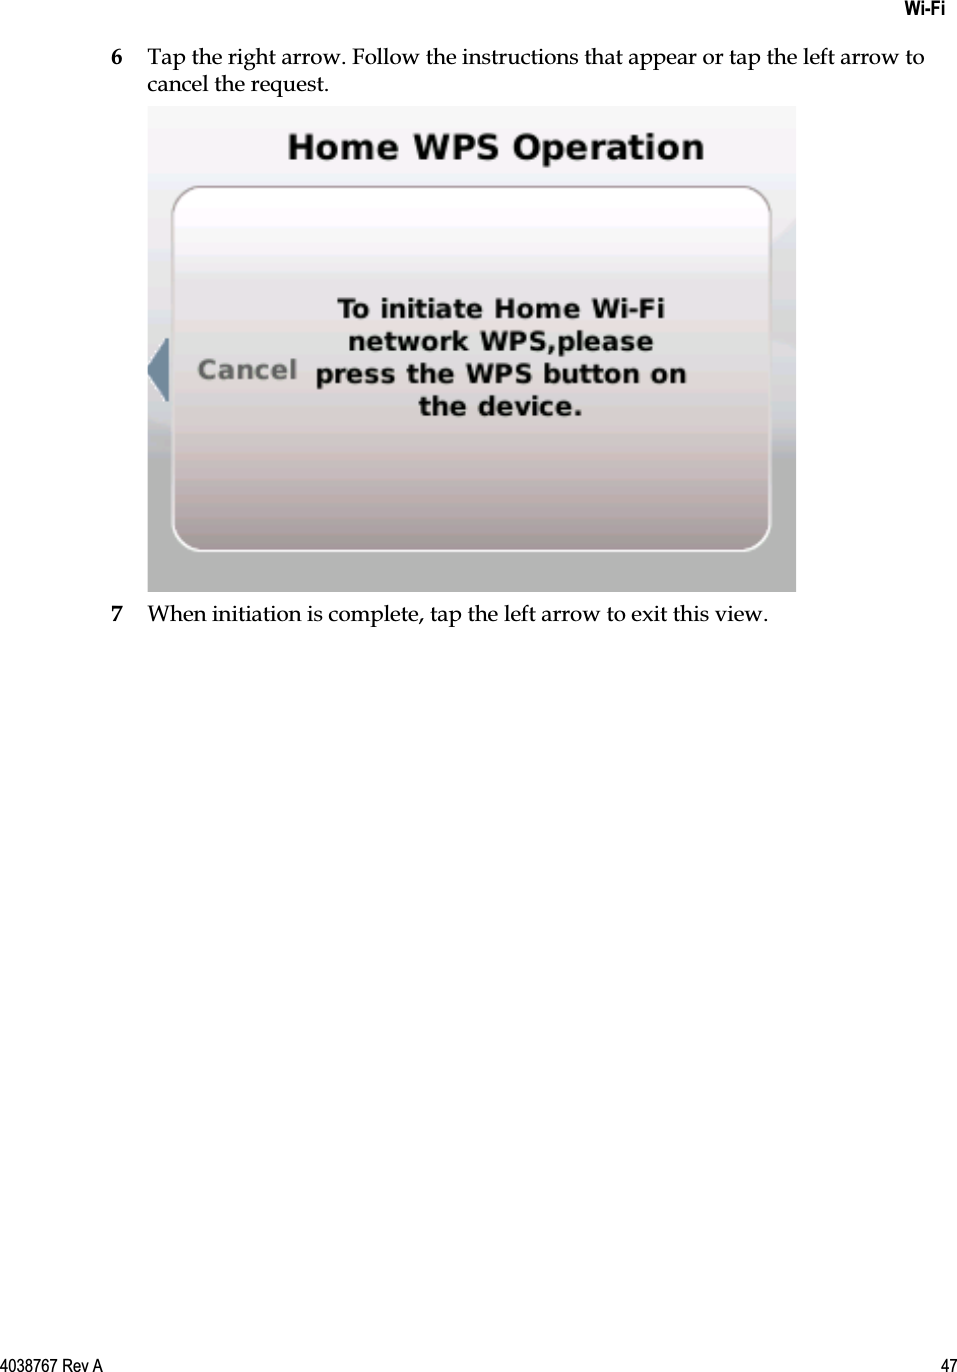    Wi-Fi  4038767 Rev A  47  6 Tap the right arrow. Follow the instructions that appear or tap the left arrow to cancel the request.  7 When initiation is complete, tap the left arrow to exit this view.  